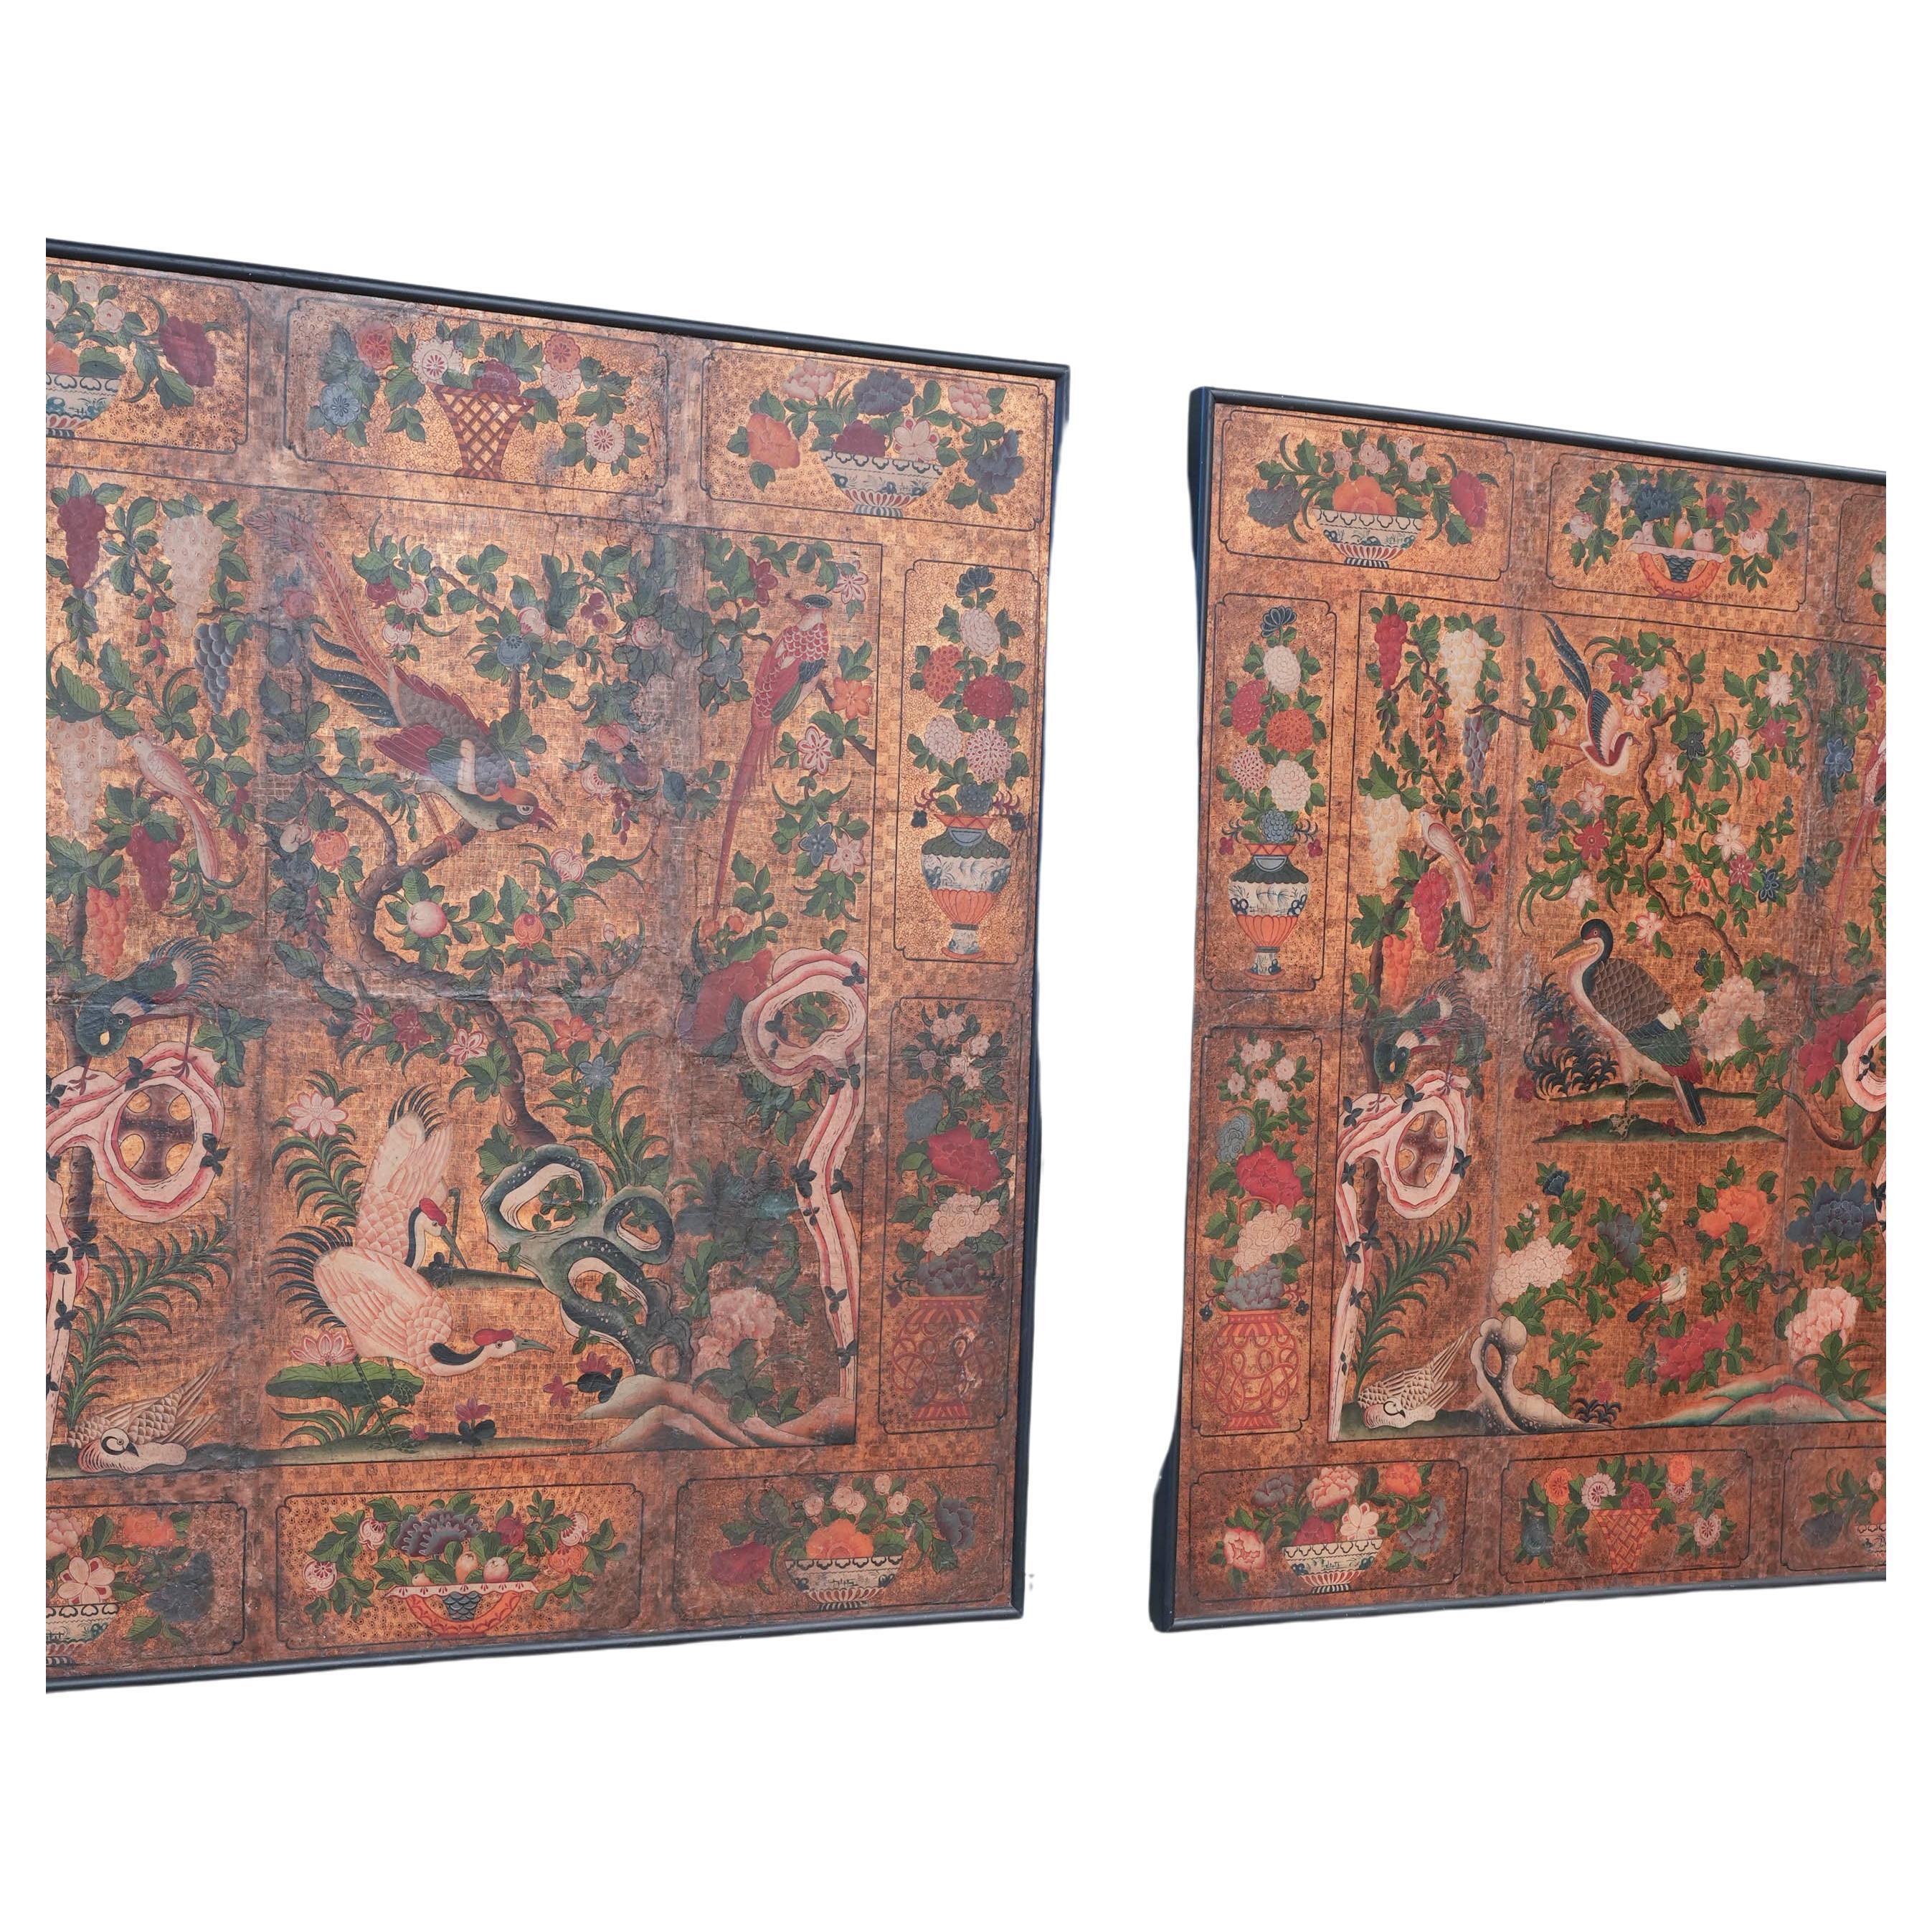 English Pair of Early 18th Century “Japanese” Leather Panels